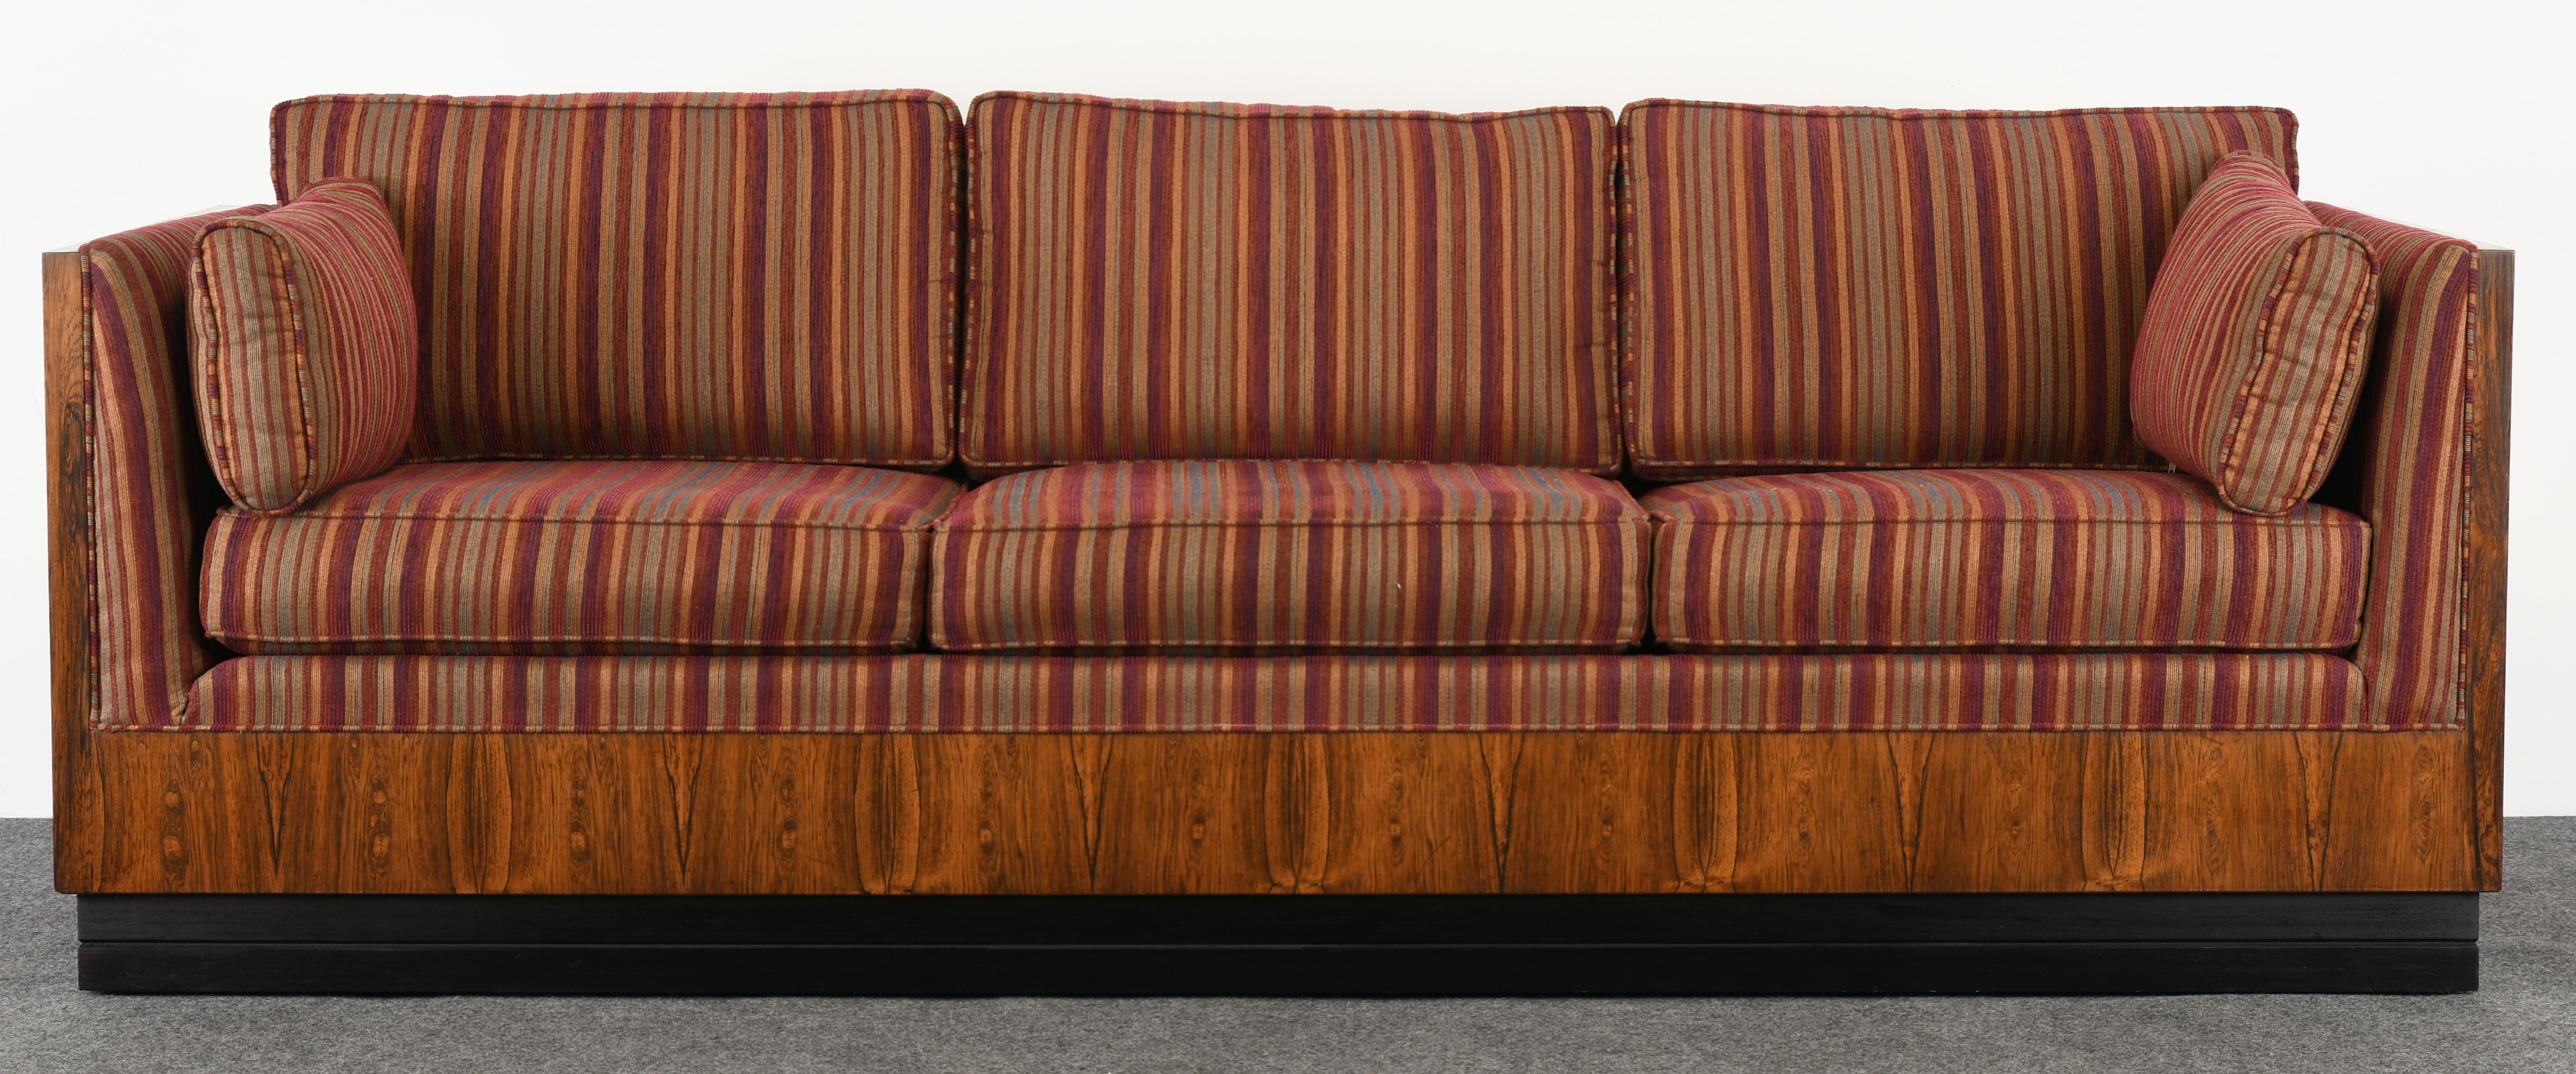 An elegant Mid-Century Modern rosewood tuxedo sofa designed by Milo Baughman for Thayer Coggin. This modern sofa would work in any modern or contemporary interior. The classic design has simple sophistication with the rosewood side and back case.